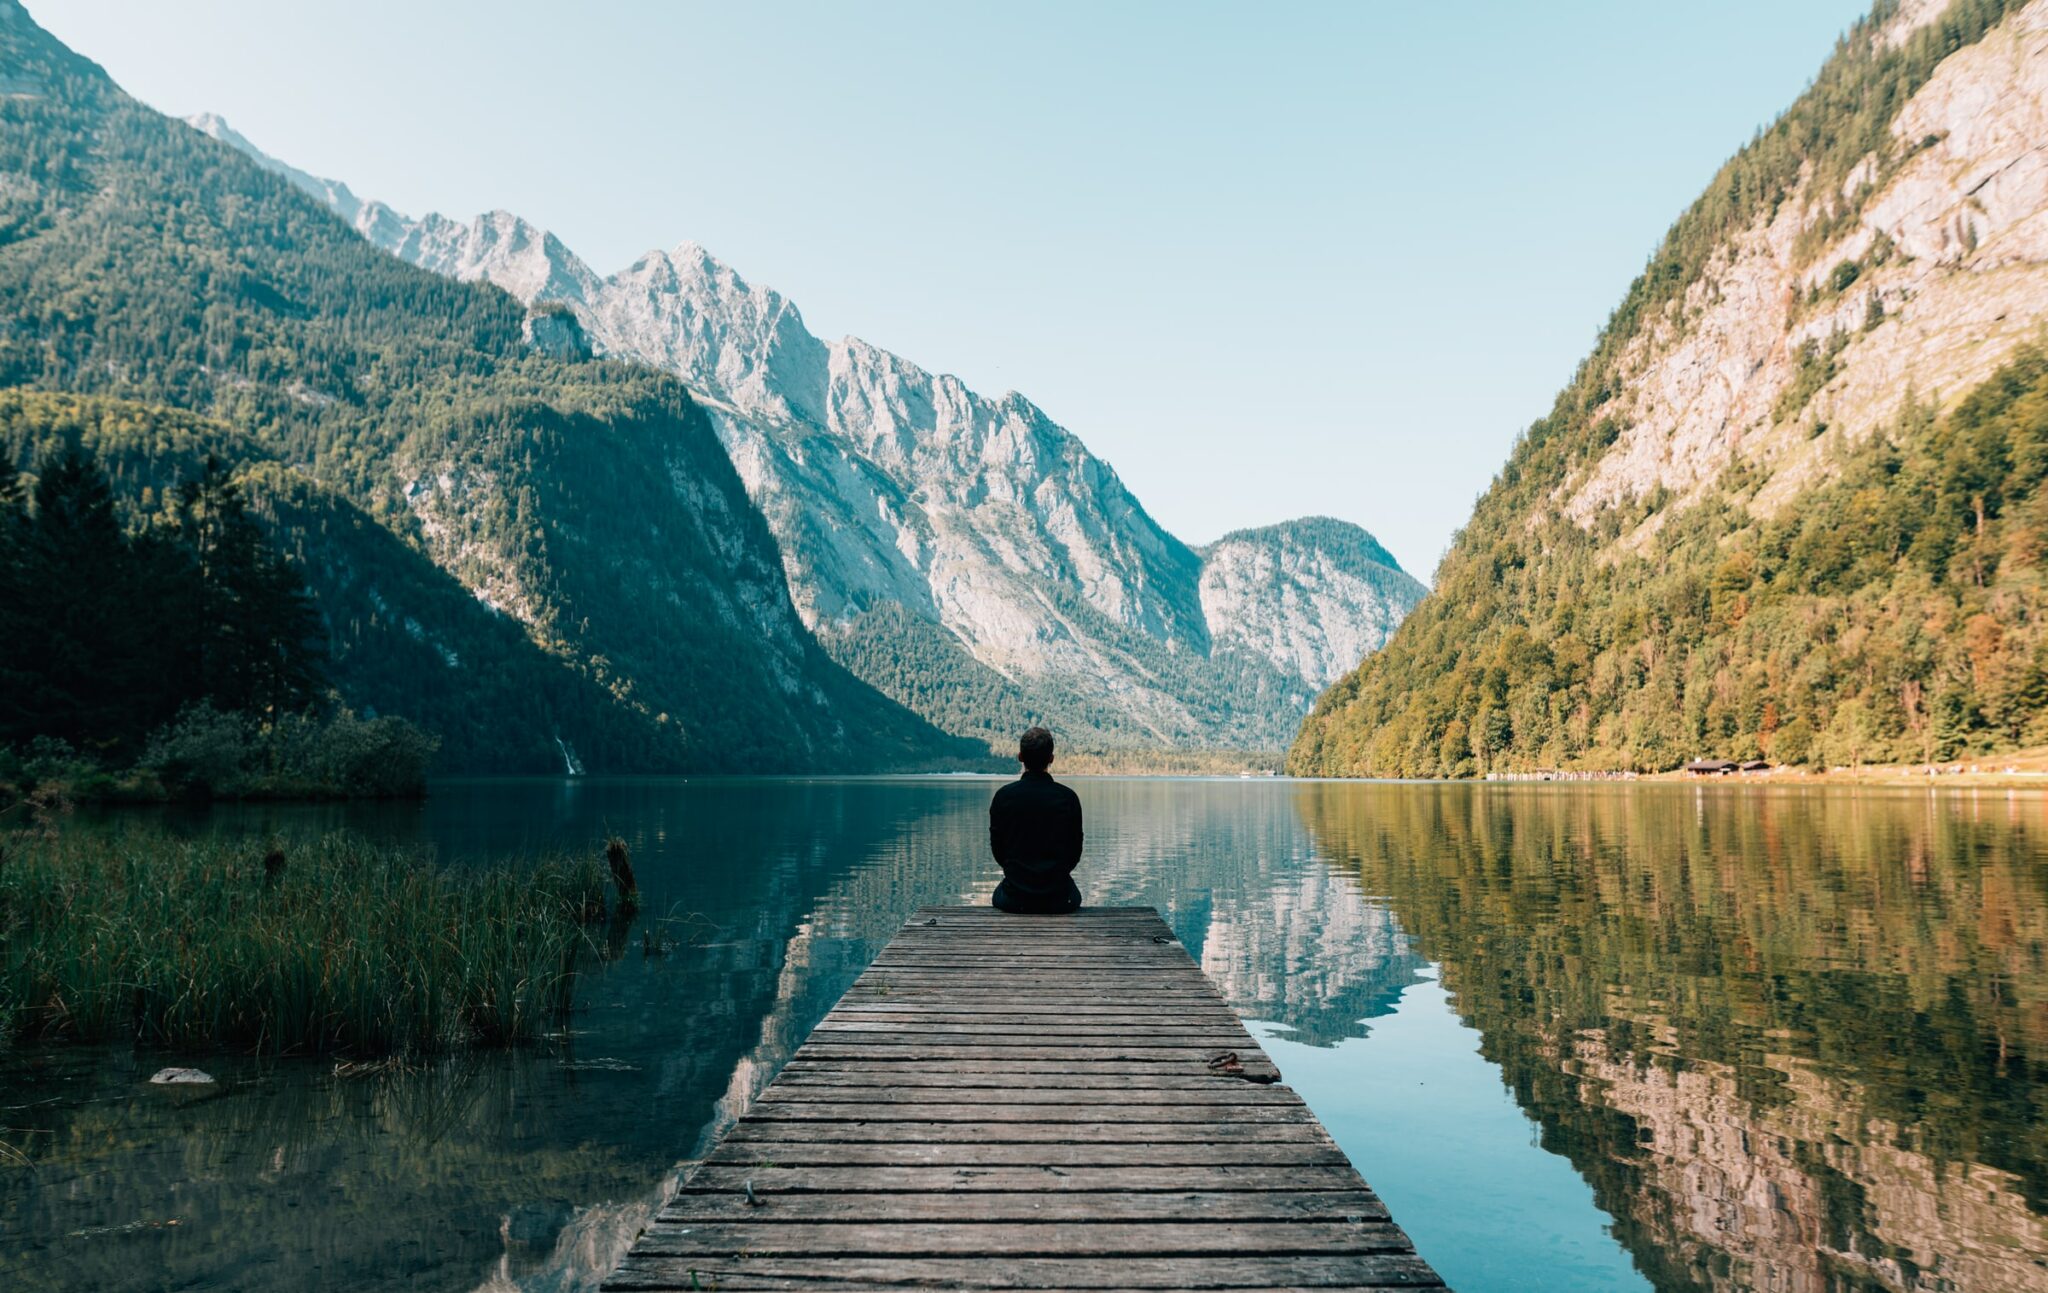 A person sitting peacefully at the end of a wooden dock, overlooking a serene mountain lake with reflections of the surrounding forested hills on the water's surface, under a clear sky, creating a tranquil and picturesque natural setting.